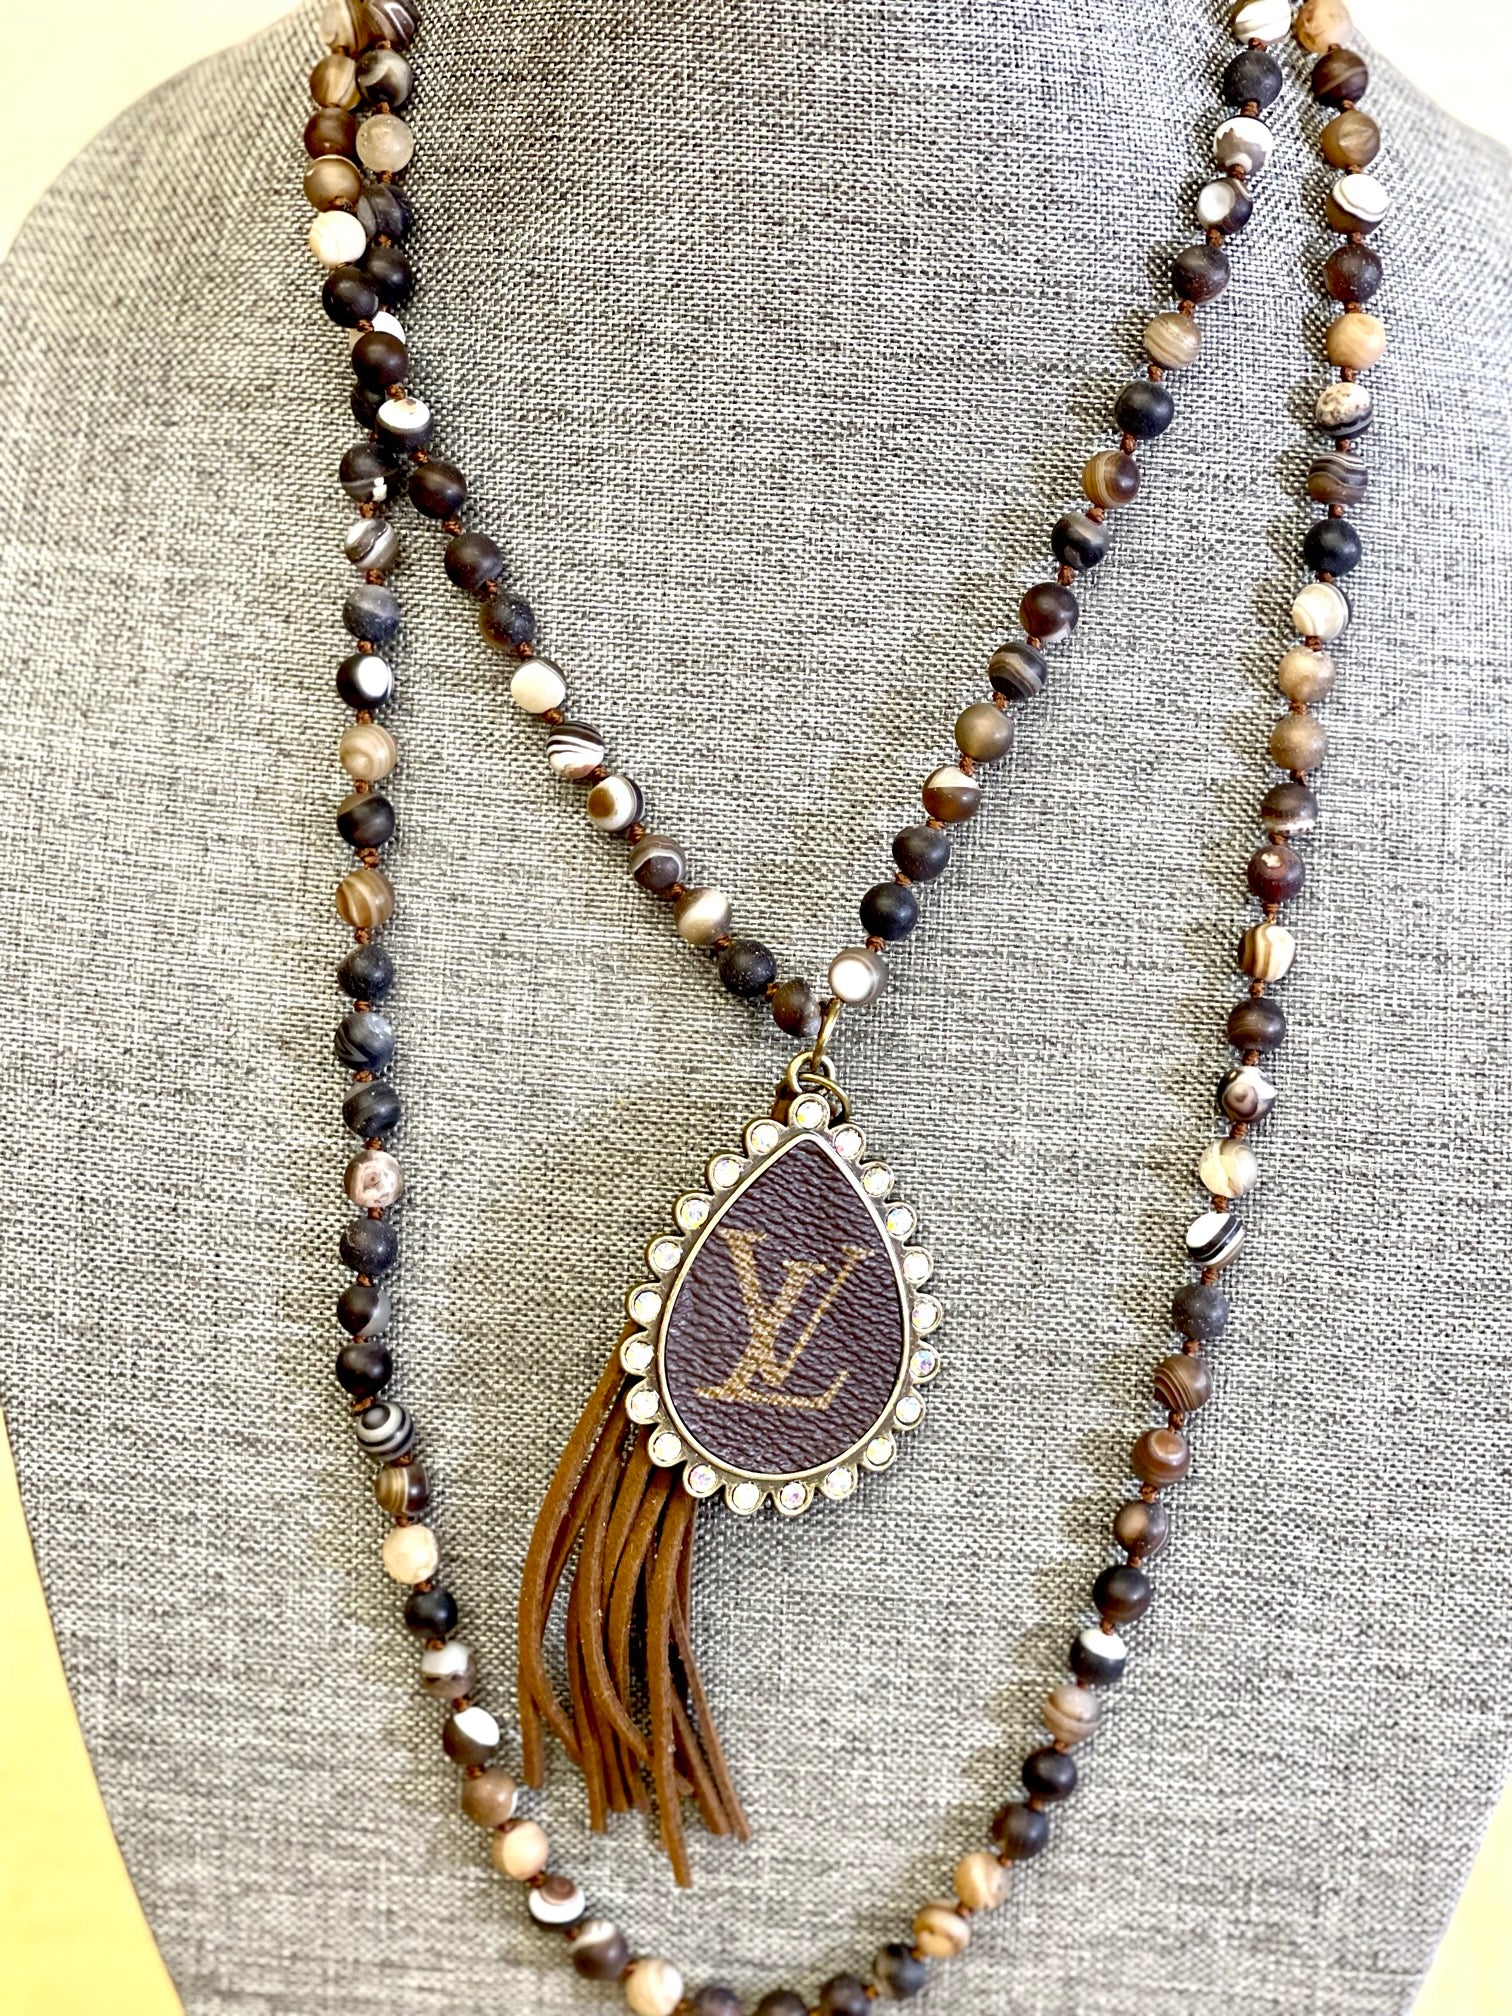 Stone- Black & brown swirl necklace with large teardrop pendant - Patches Of Upcycling